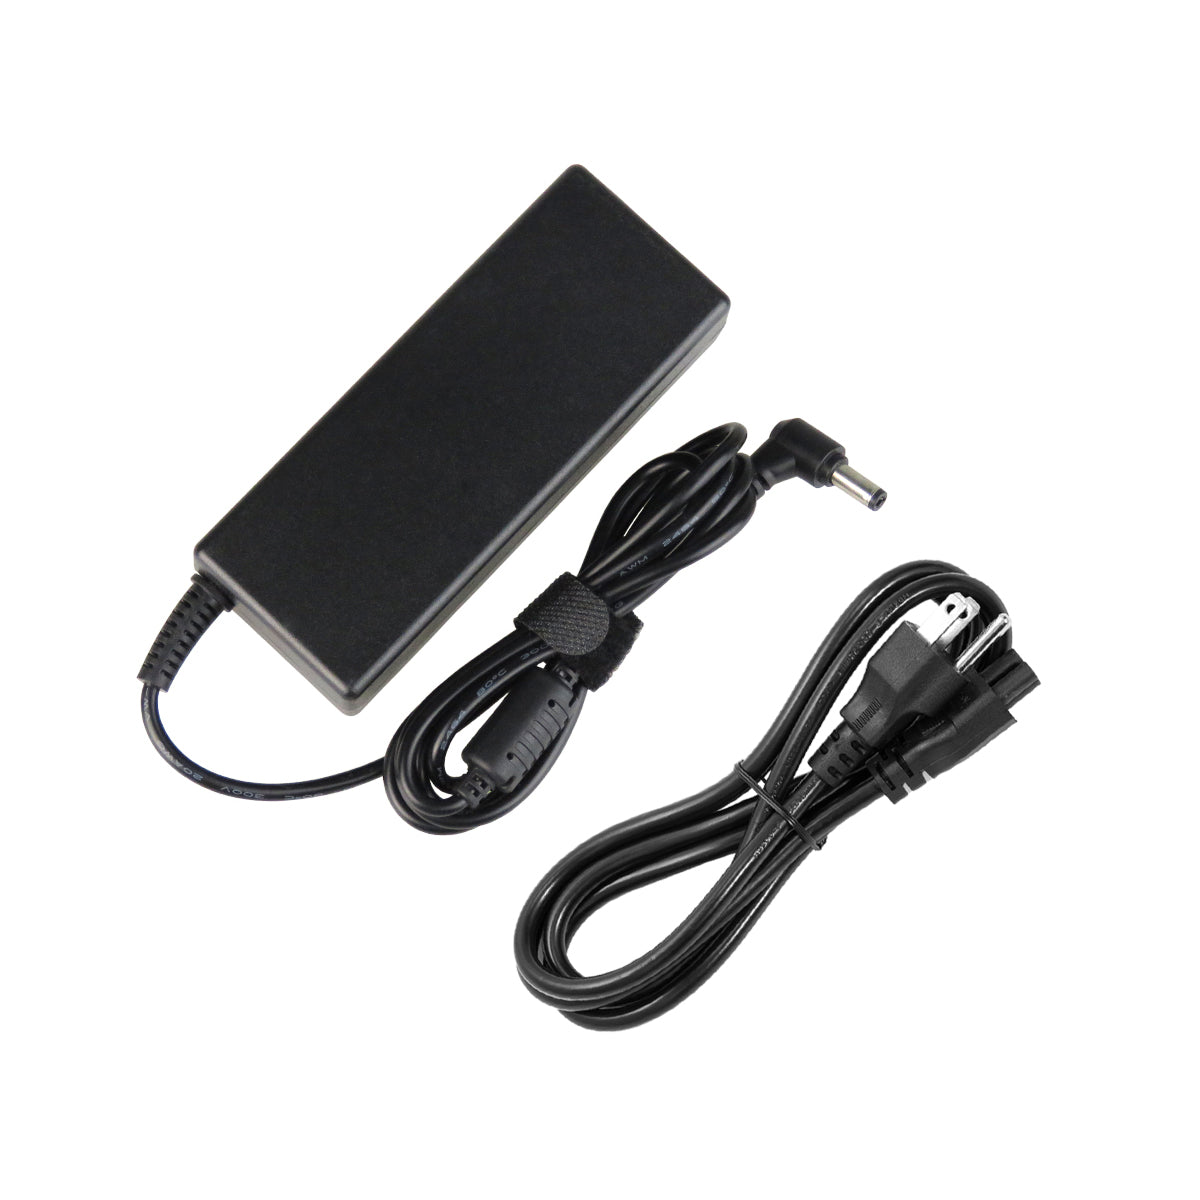 AC Adapter Charger for ASUS A46CM Notebook.